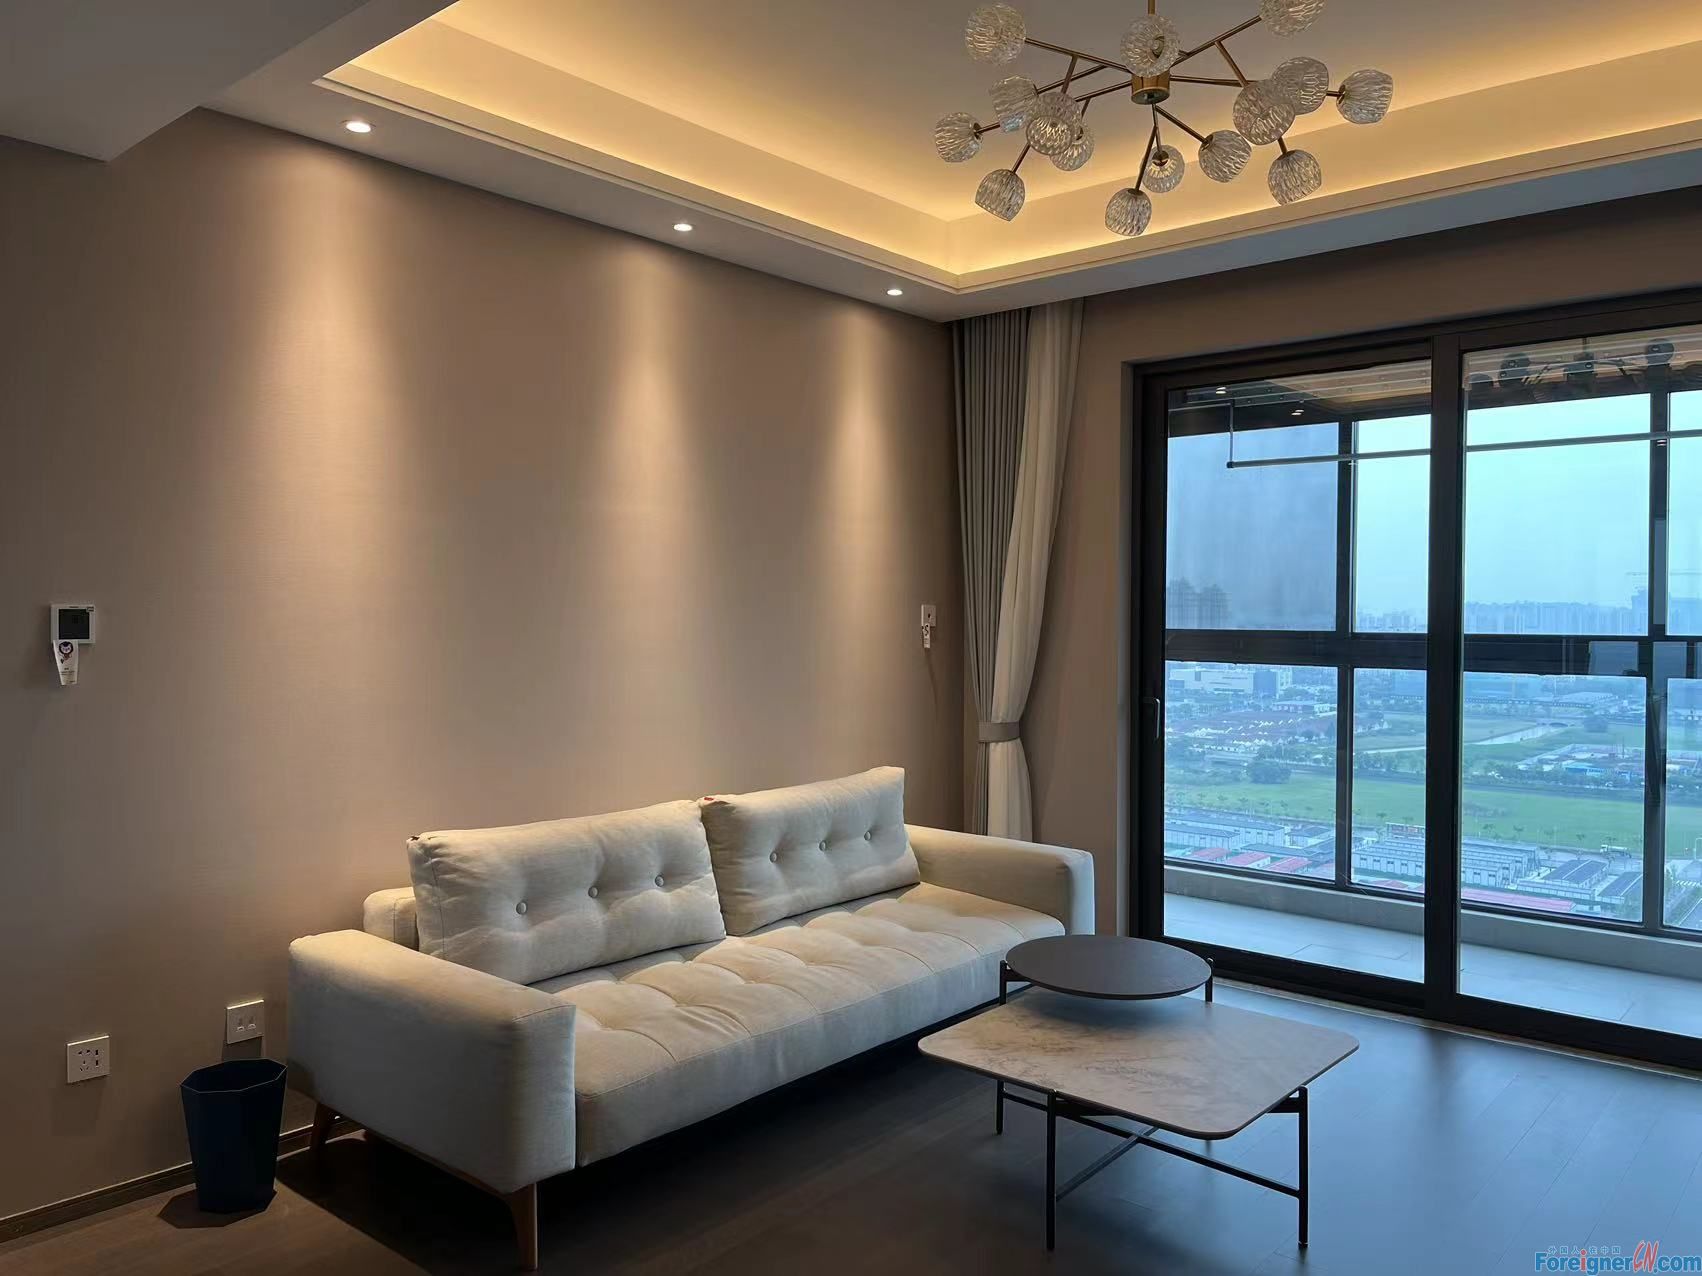 Brand new!!! Fabulous Apartment available to rent/ Central AC ,Floor heating/brand new Furniture/nice balcony with open view/Close to shopping Mall/ Suzhou Foreign Language school Xiangcheng Campus  